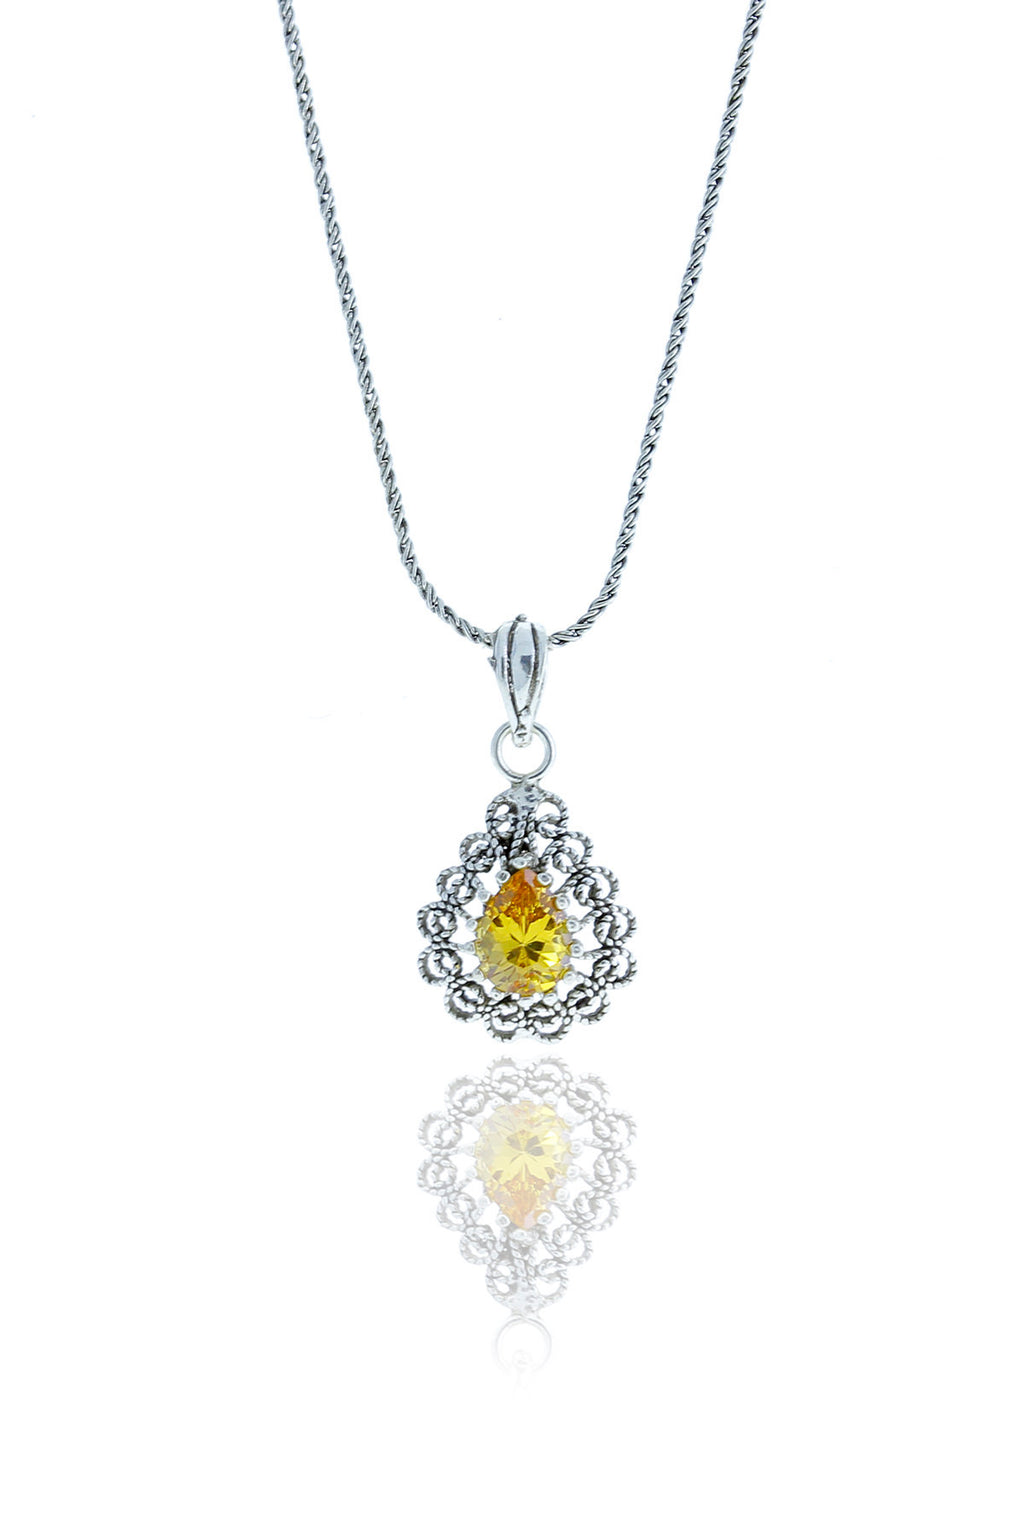 Drop Model Authentic Filigree Silver Necklace With Citrine (NG201017534)